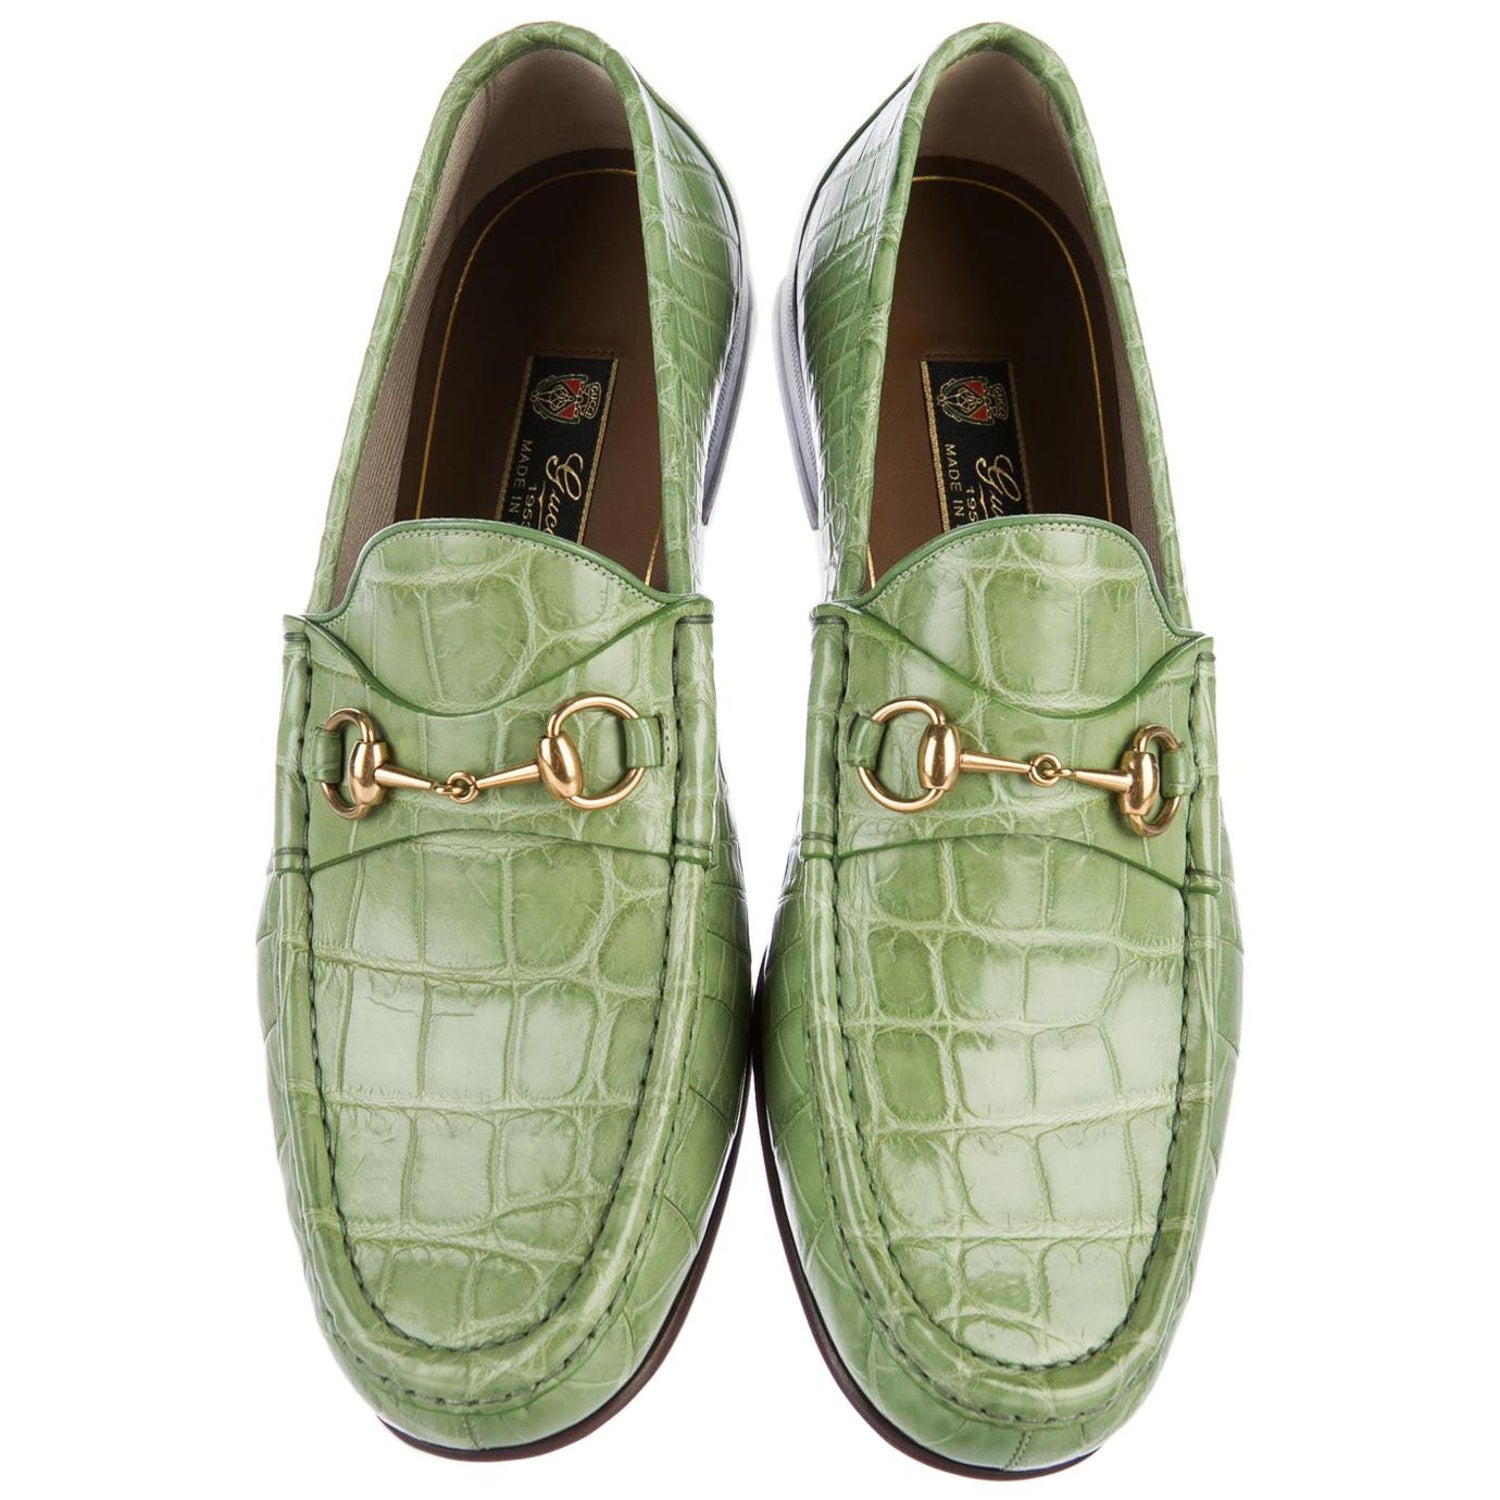 Mens Gucci Loafers - 3 For Sale on 1stDibs | mens gucci boots, mens gucci  slippers, gucci loafers mens slippers sale